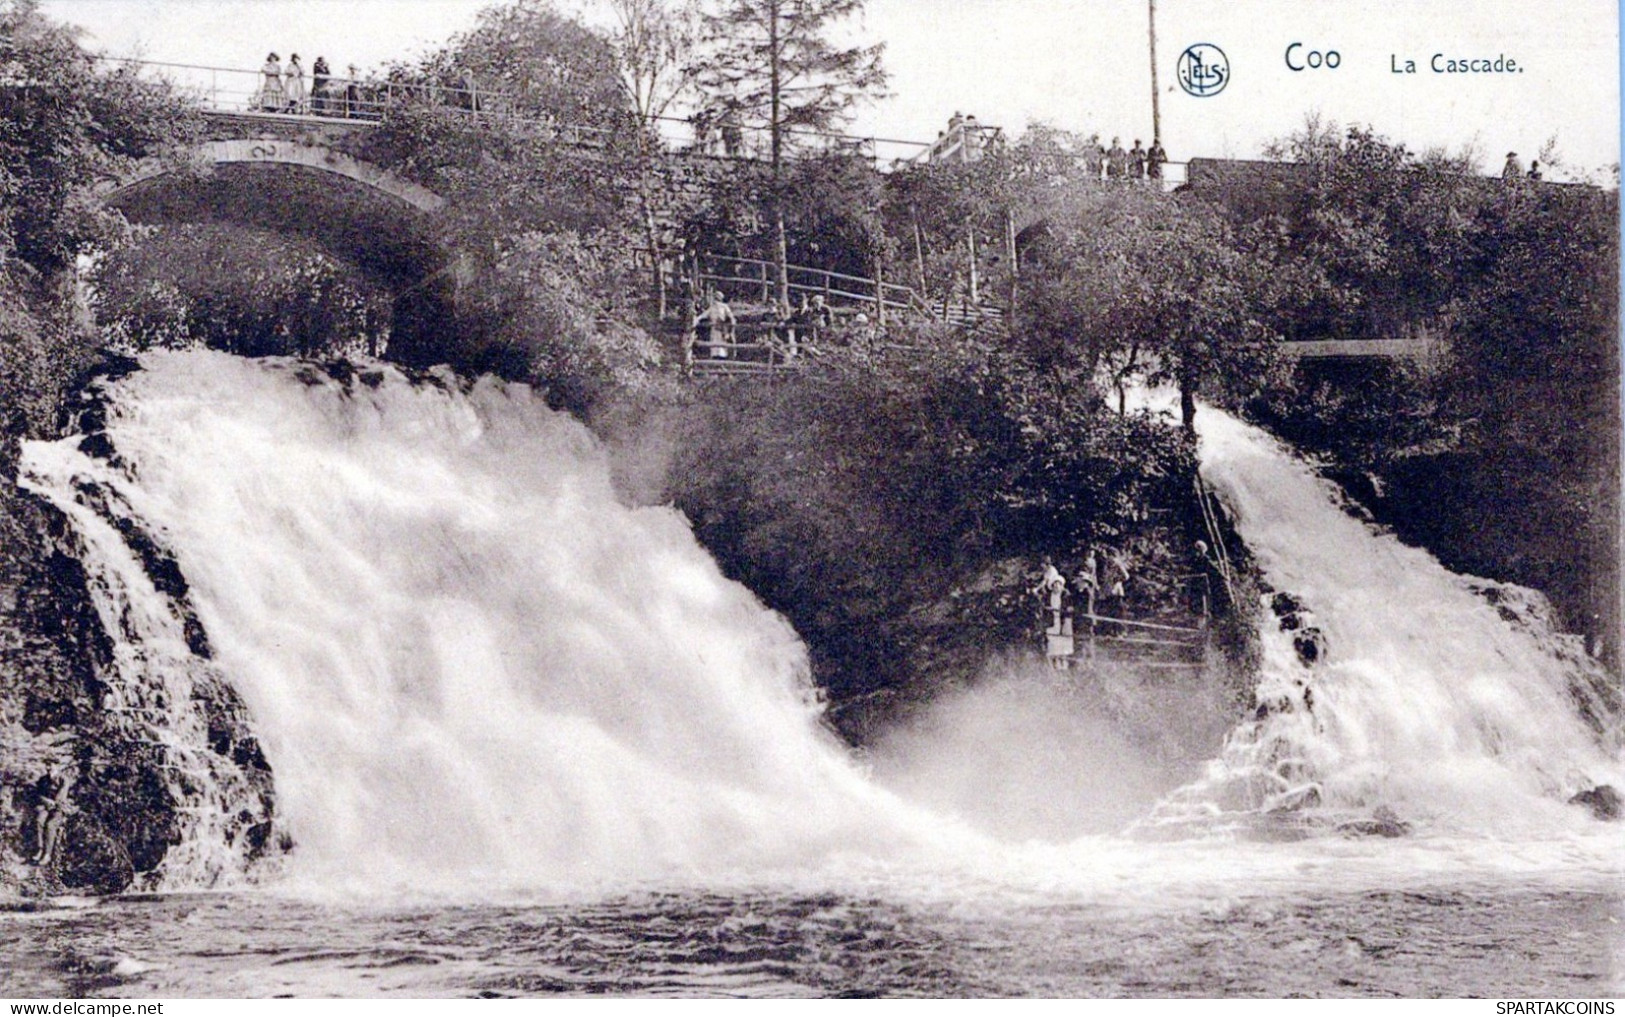 BELGIUM COO WATERFALL Province Of Liège Postcard CPA Unposted #PAD096.GB - Stavelot